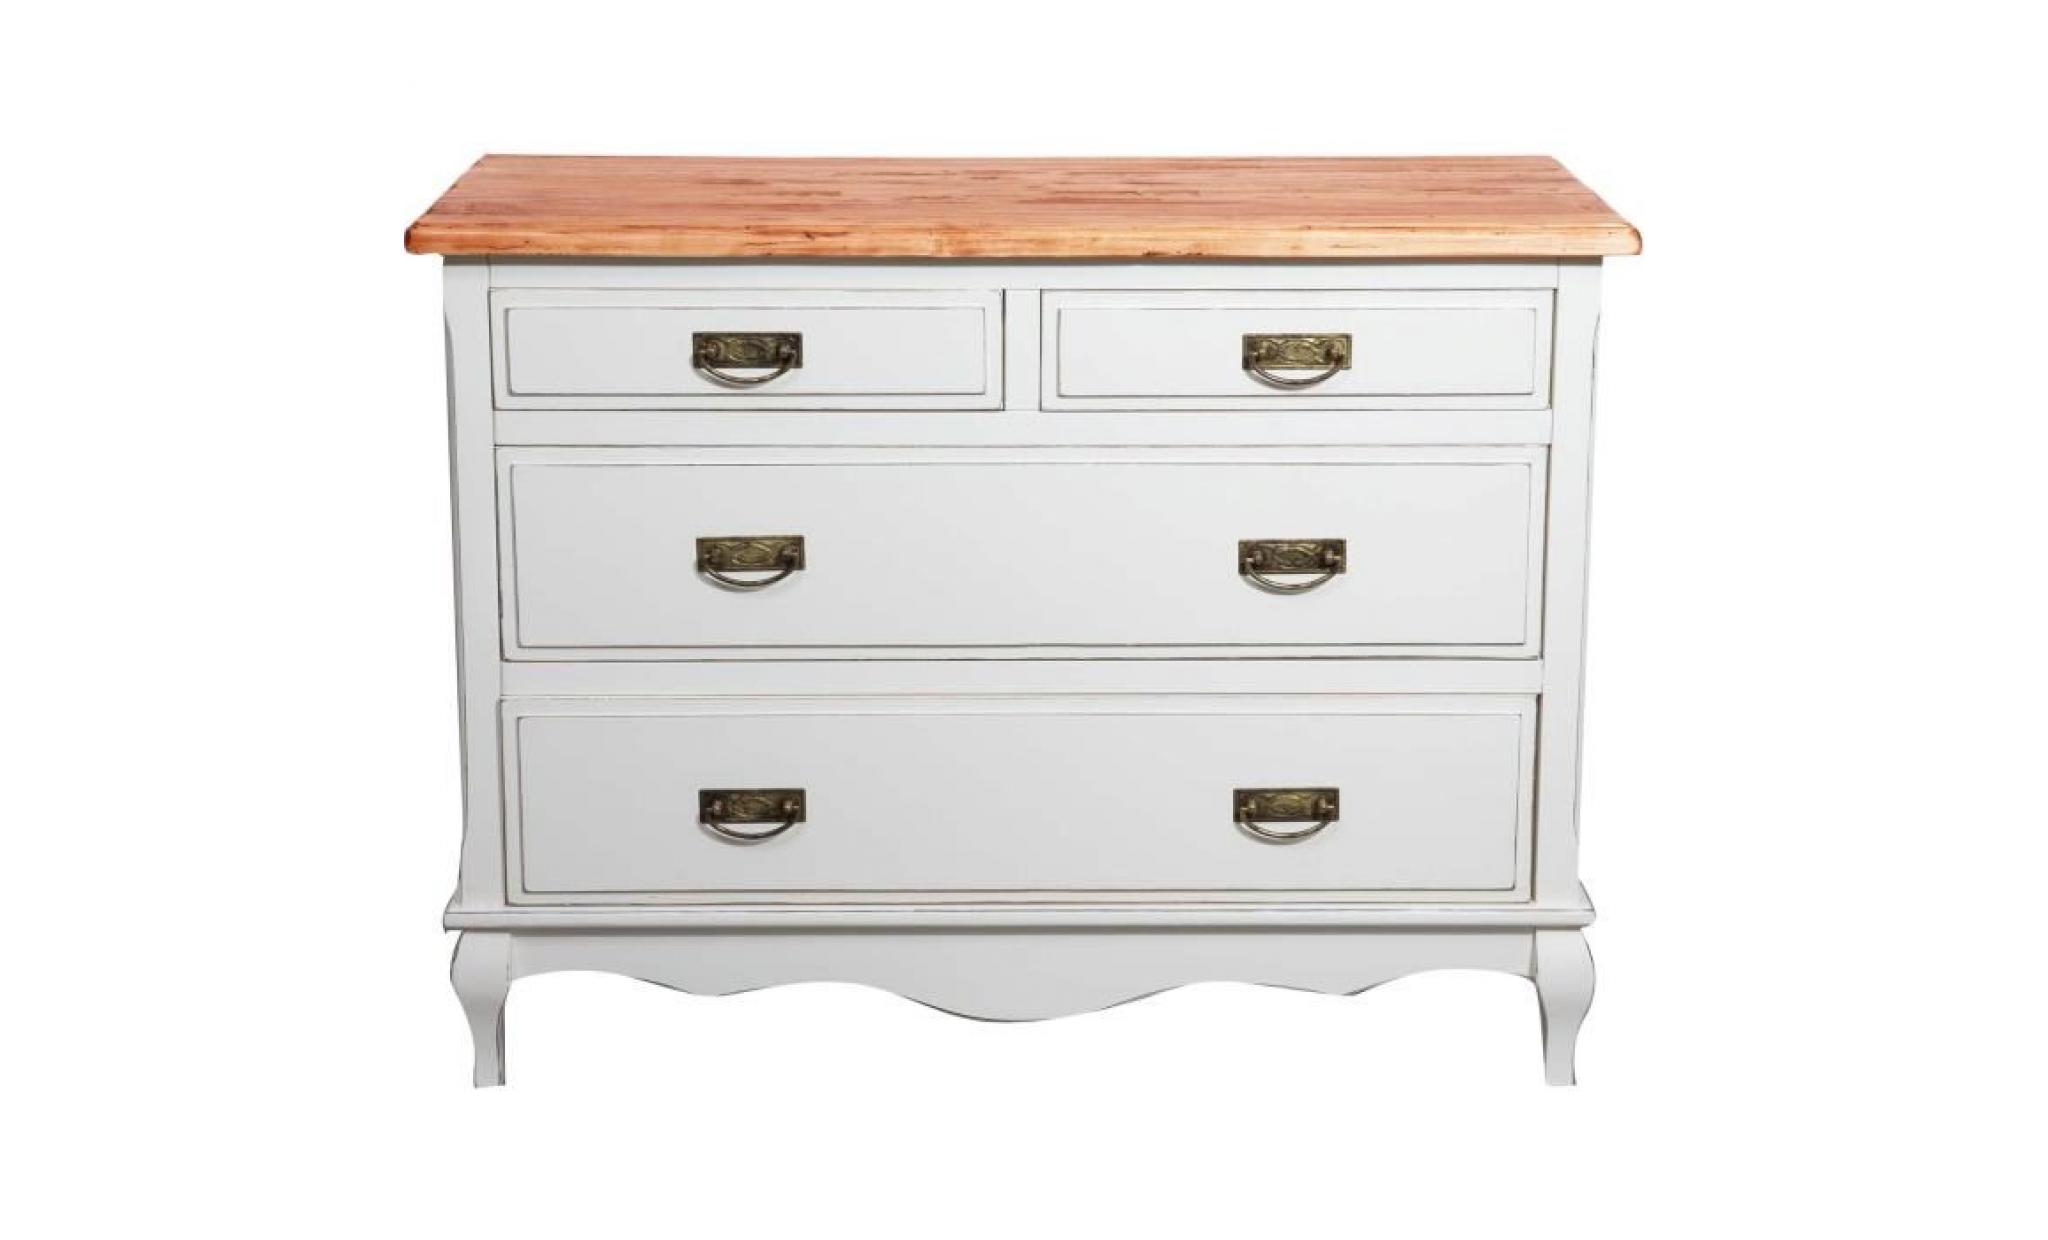 commode country in bois massif di tilleul structure blanche ancienne piano finiture noix 107x47x80 c